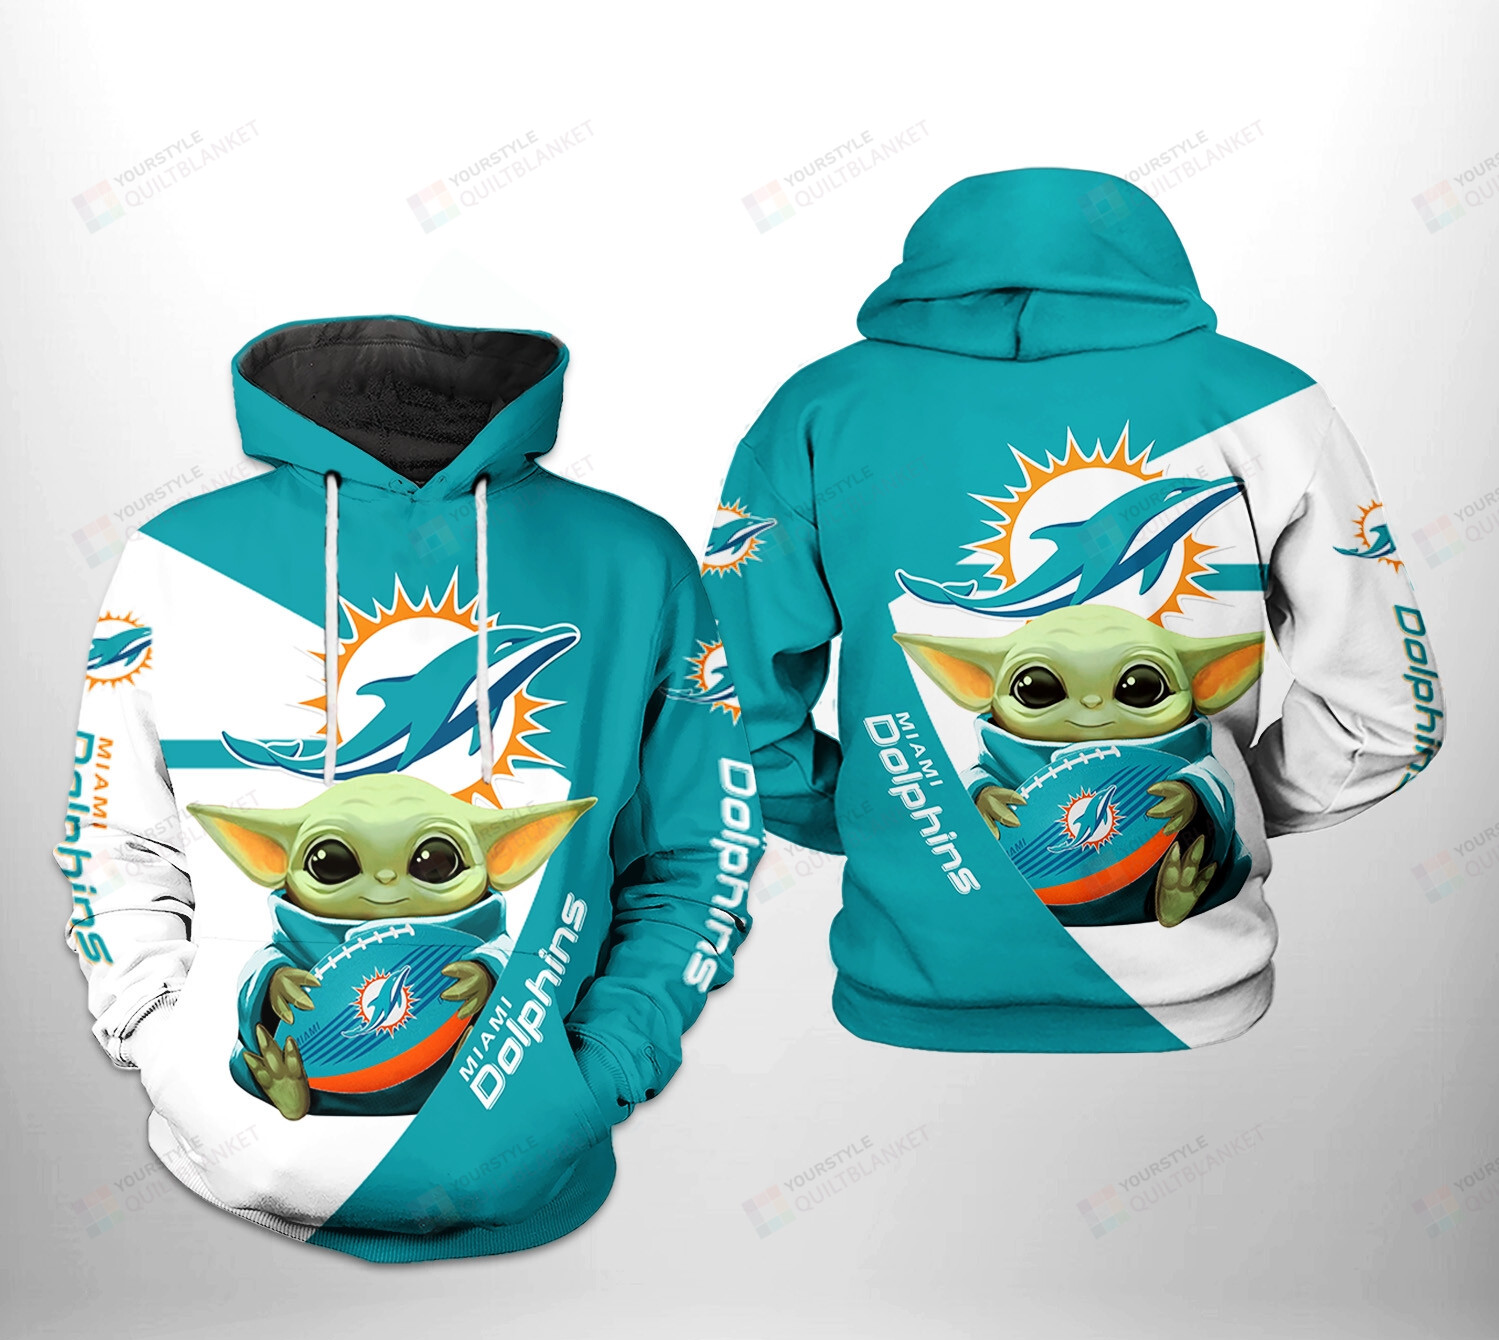 Miami Dolphins Shop - Miami Dolphins NFL Baby Yoda Team 3D All Over Print Hoodie Zip up Hoodie